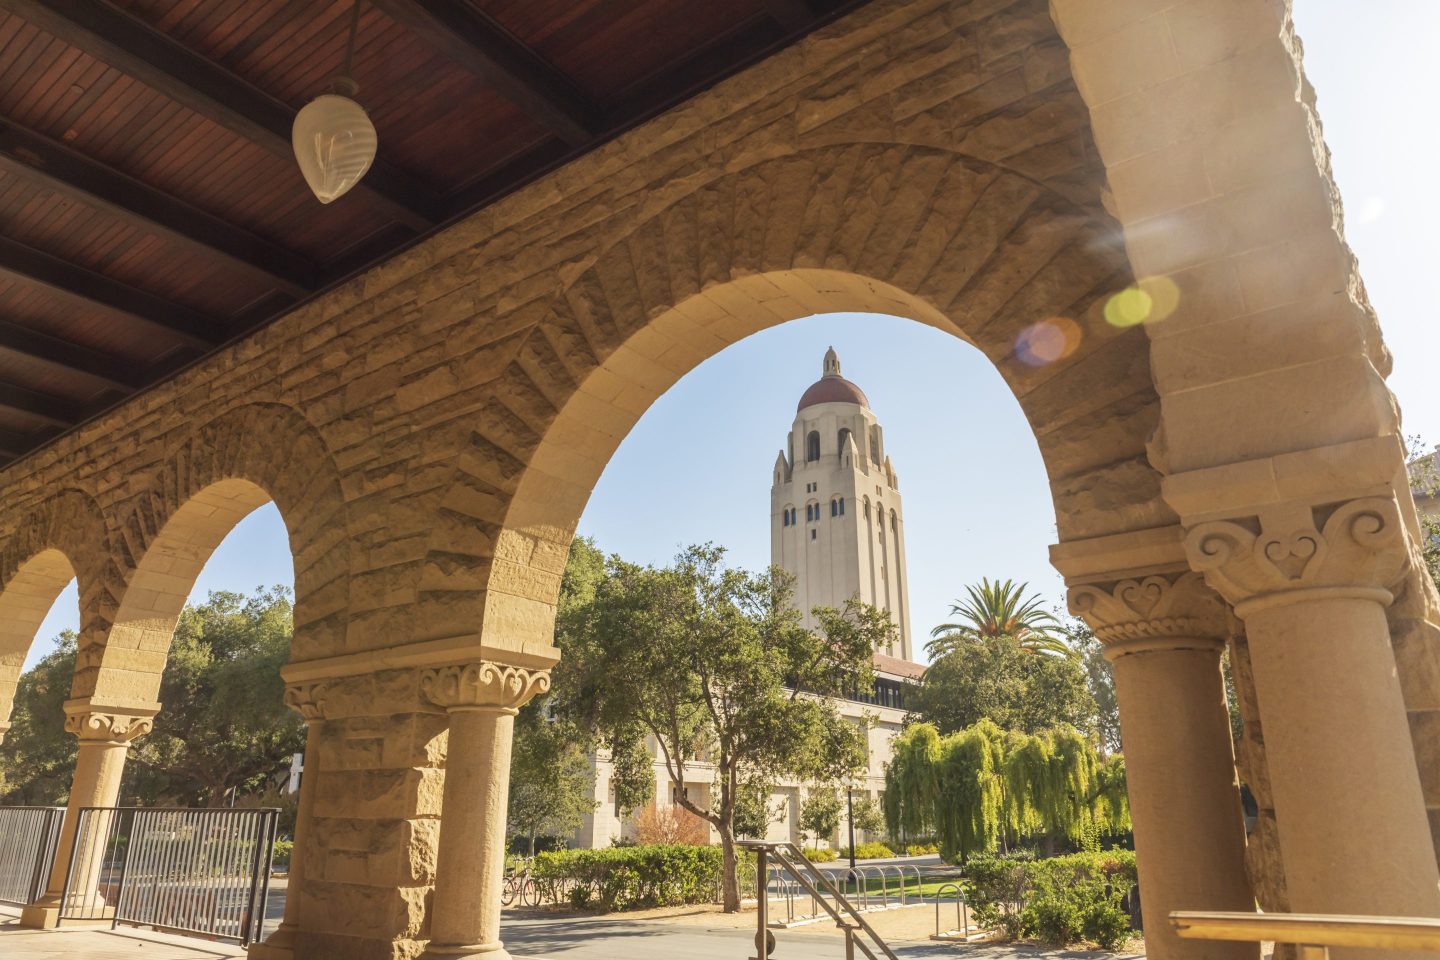 Hoover Tower looms over Stanford campus